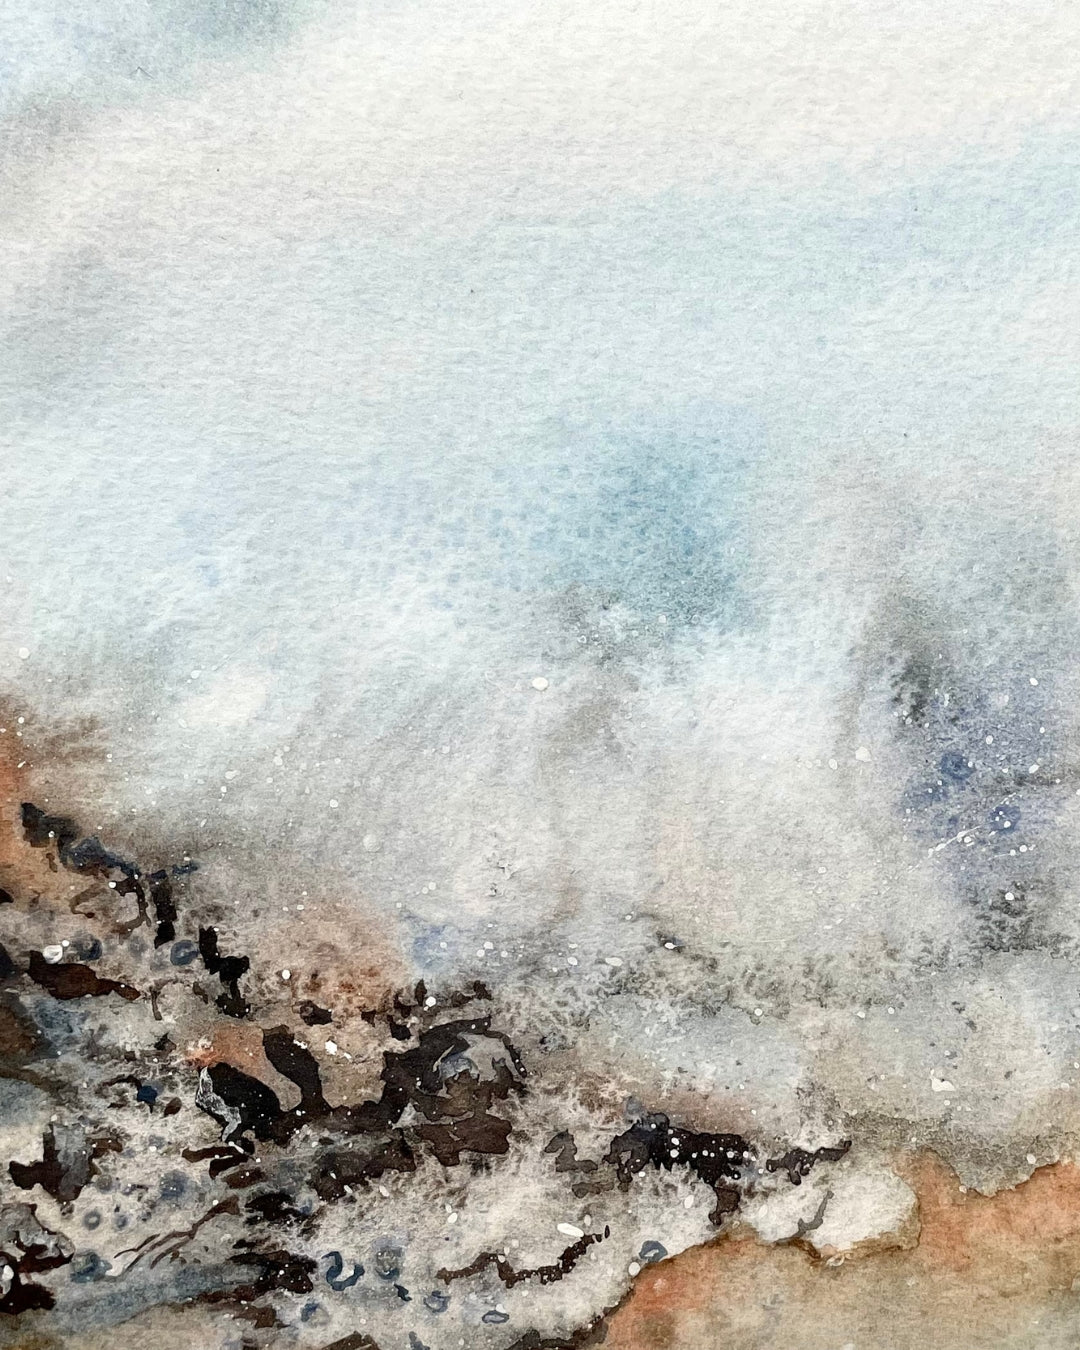 SEPT 7th - Inspired by the Sea – Watercolour Workshop, North Berwick (Rocks, Sea, Sand)